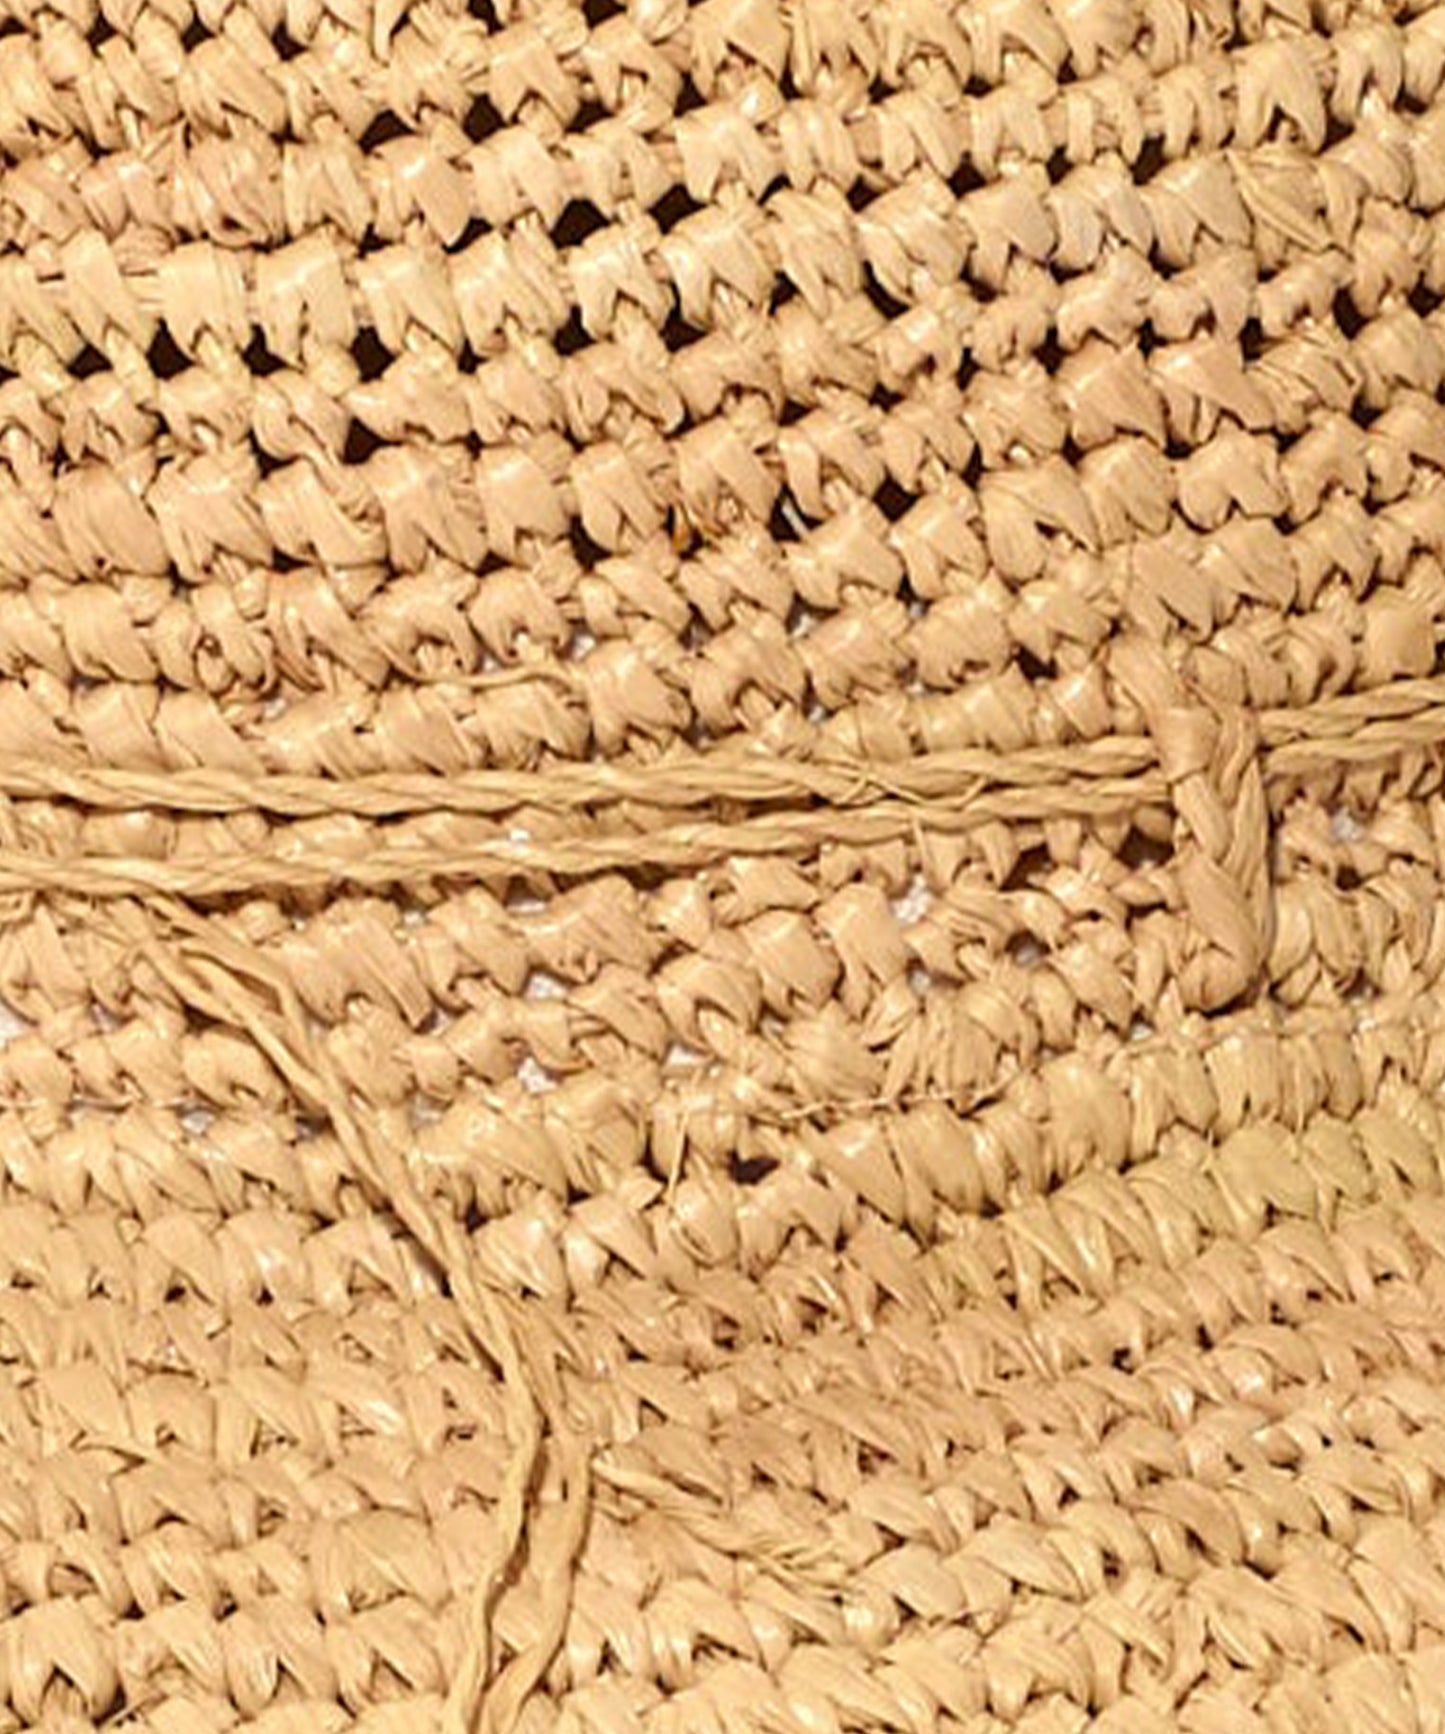 Raffia Packable Bucket Hat in color Natural